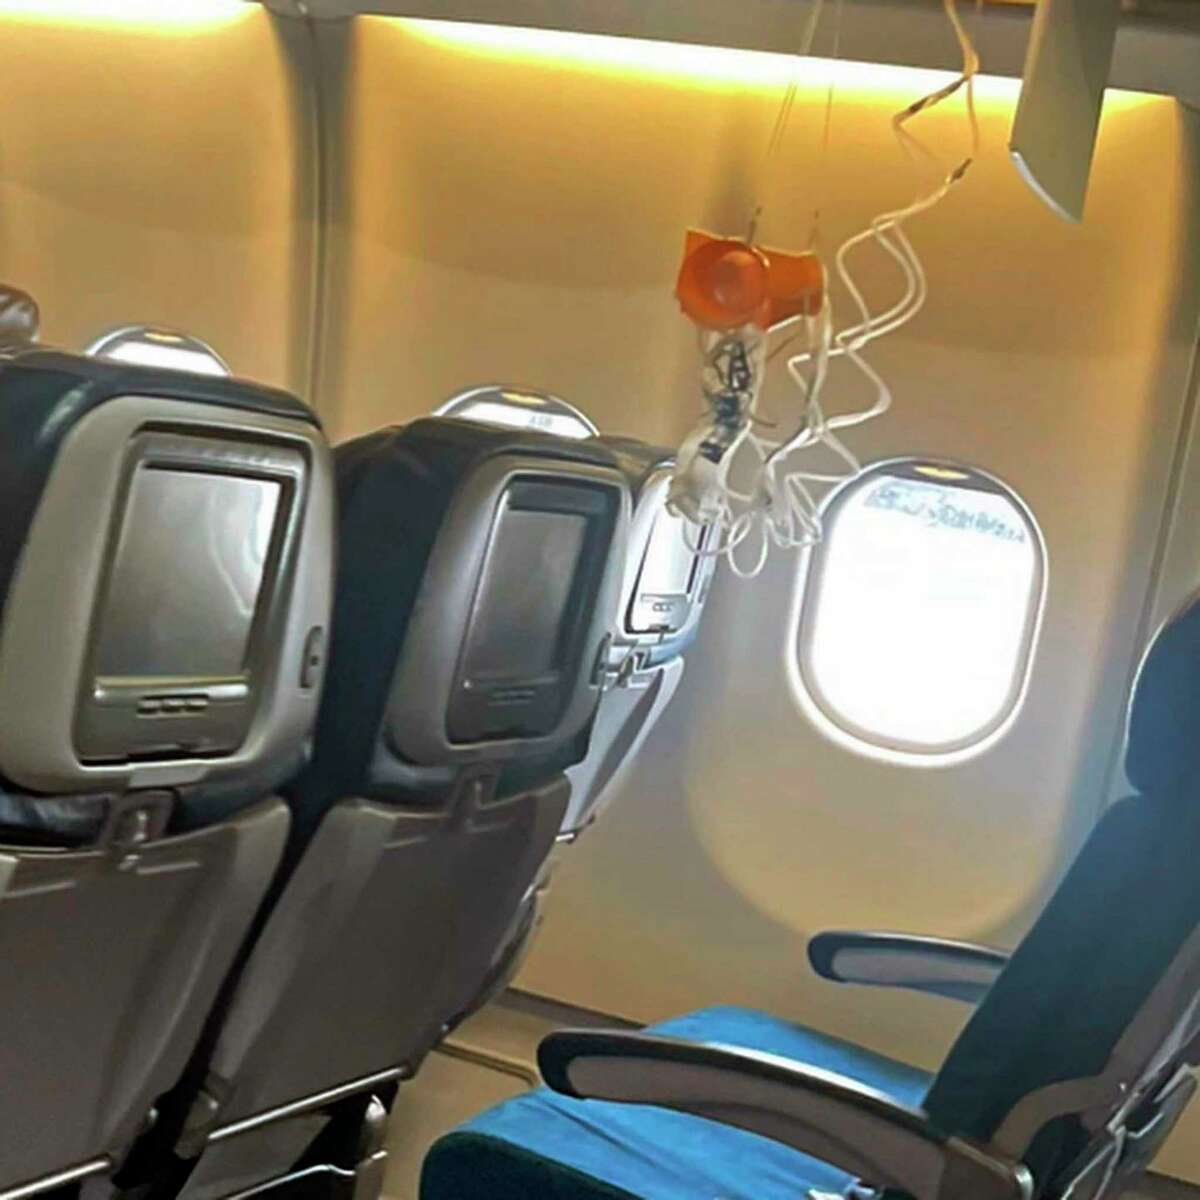 This mobile photo courtesy of passenger Jazmin Bitanga via the Associated Press shows the interior of a Hawaiian Airlines plane on its flight from Phoenix to Honolulu after severe turbulence rocked the flight.